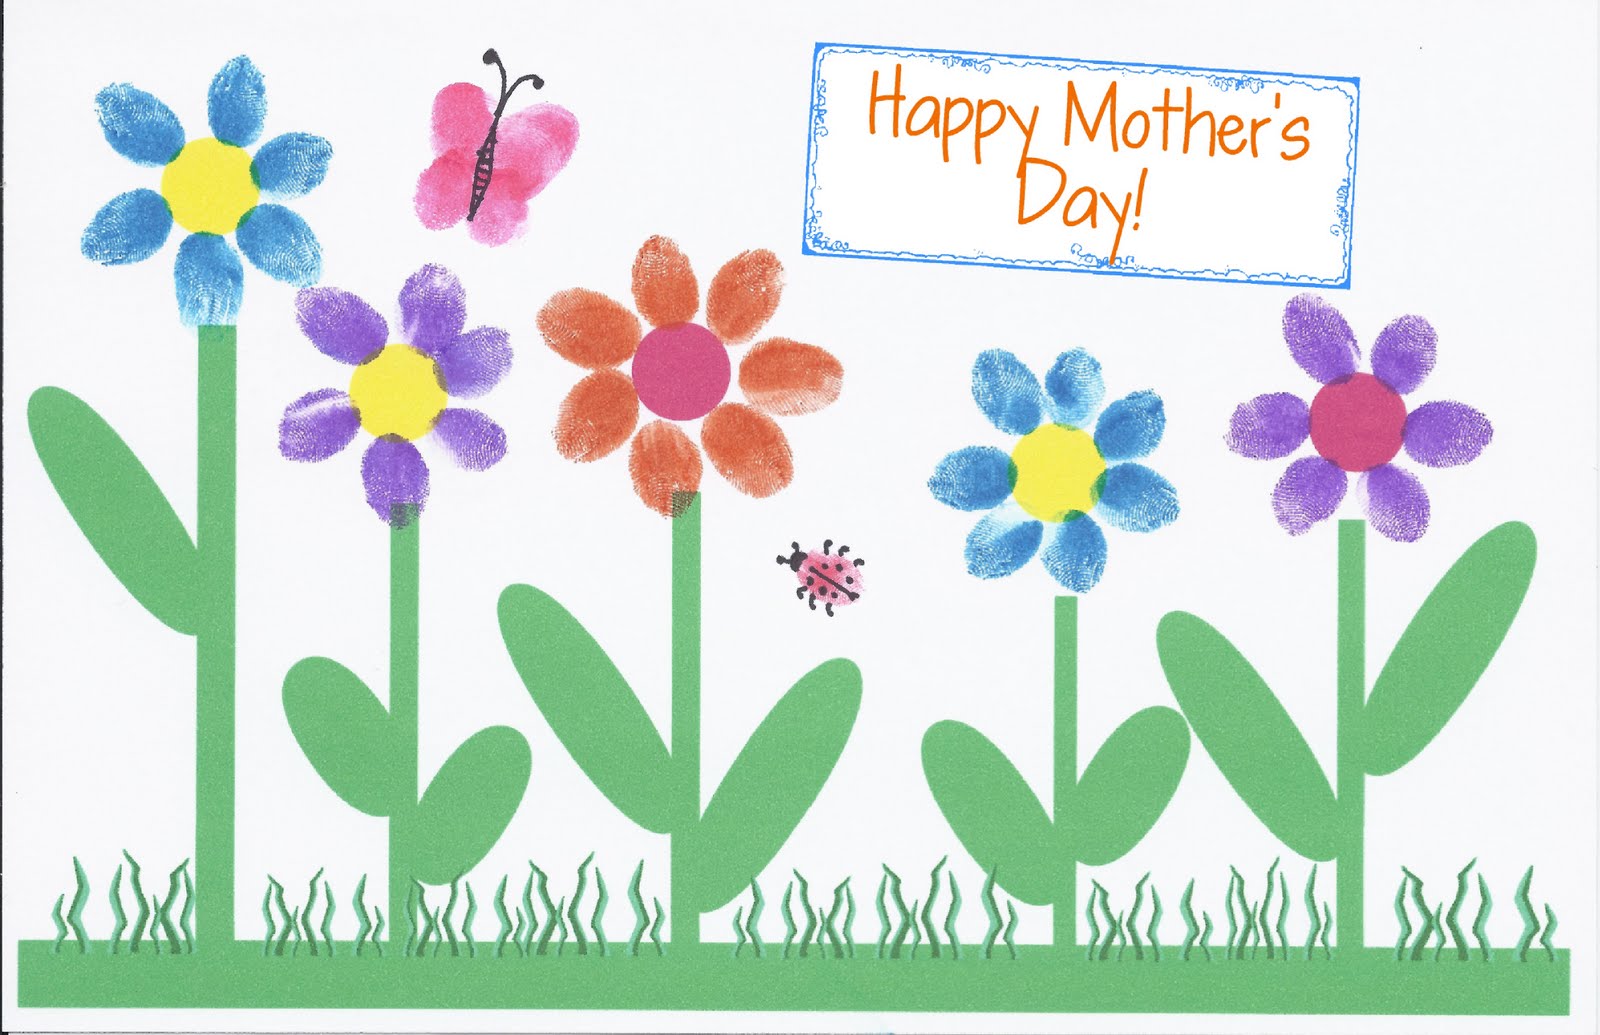 62-free-mothers-day-clip-art-cliparting